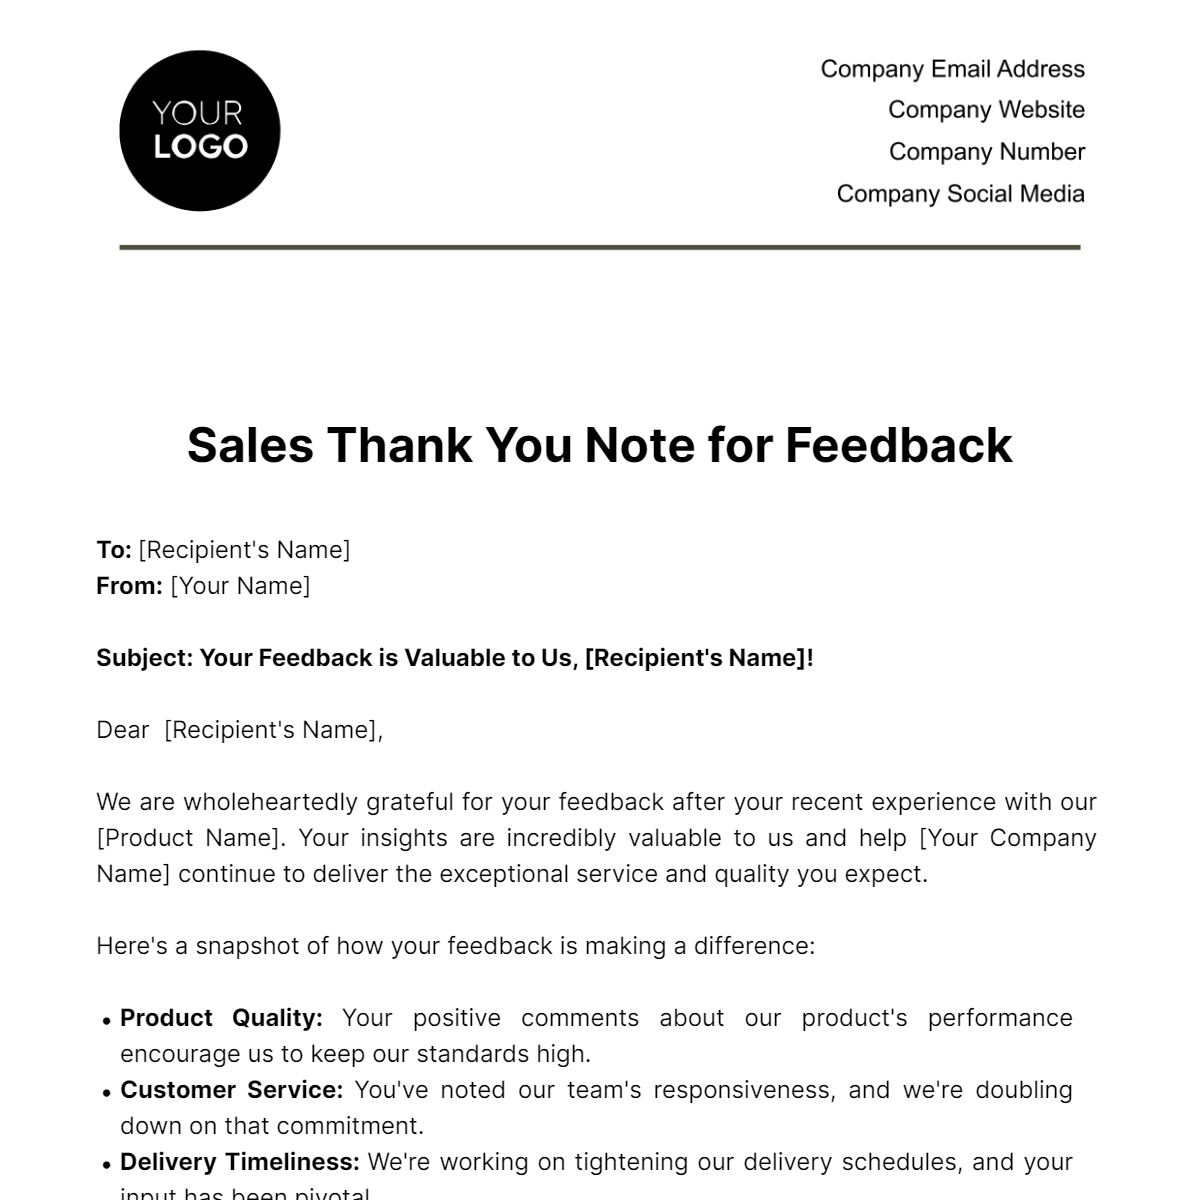 Sales Thank You Note for Feedback Template